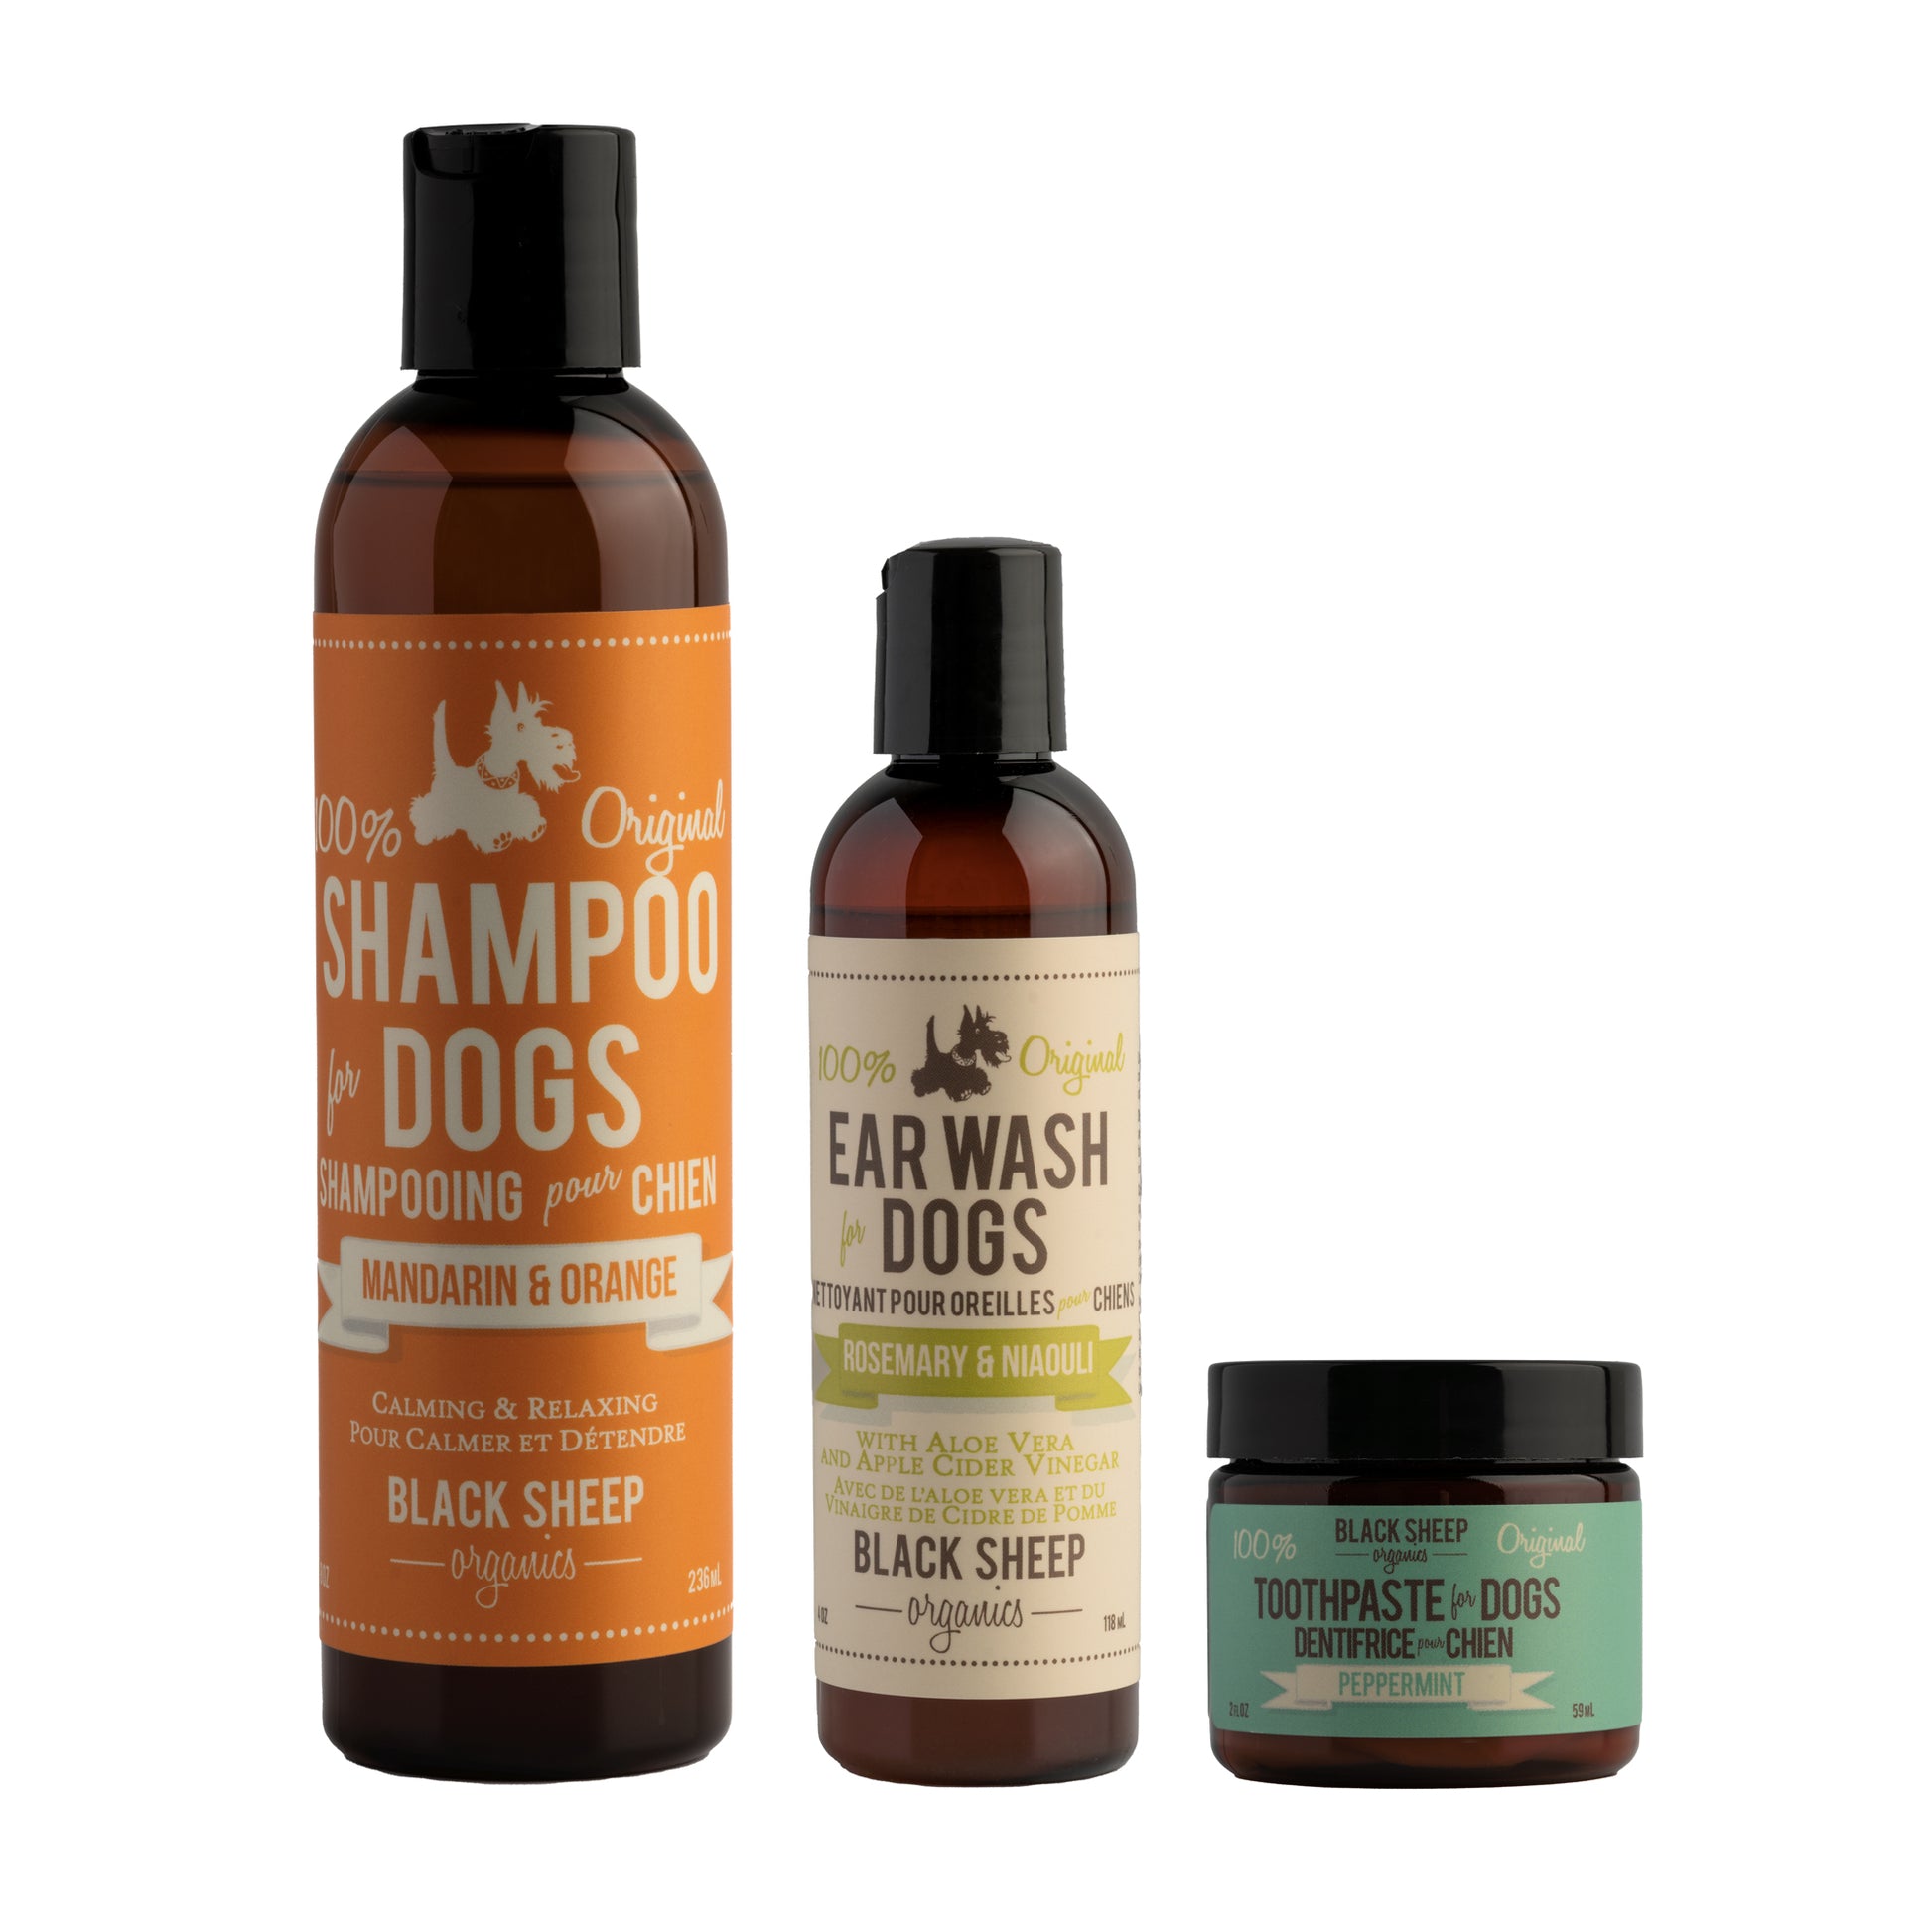 Puppy baths...... could you imagine anything better? Introduce your new puppy to a natural kind of clean. Calming and relaxing Mandarin & Orange Shampoo is grouped here with wonderfully gentle Ear Wash and minty fresh Toothpaste.